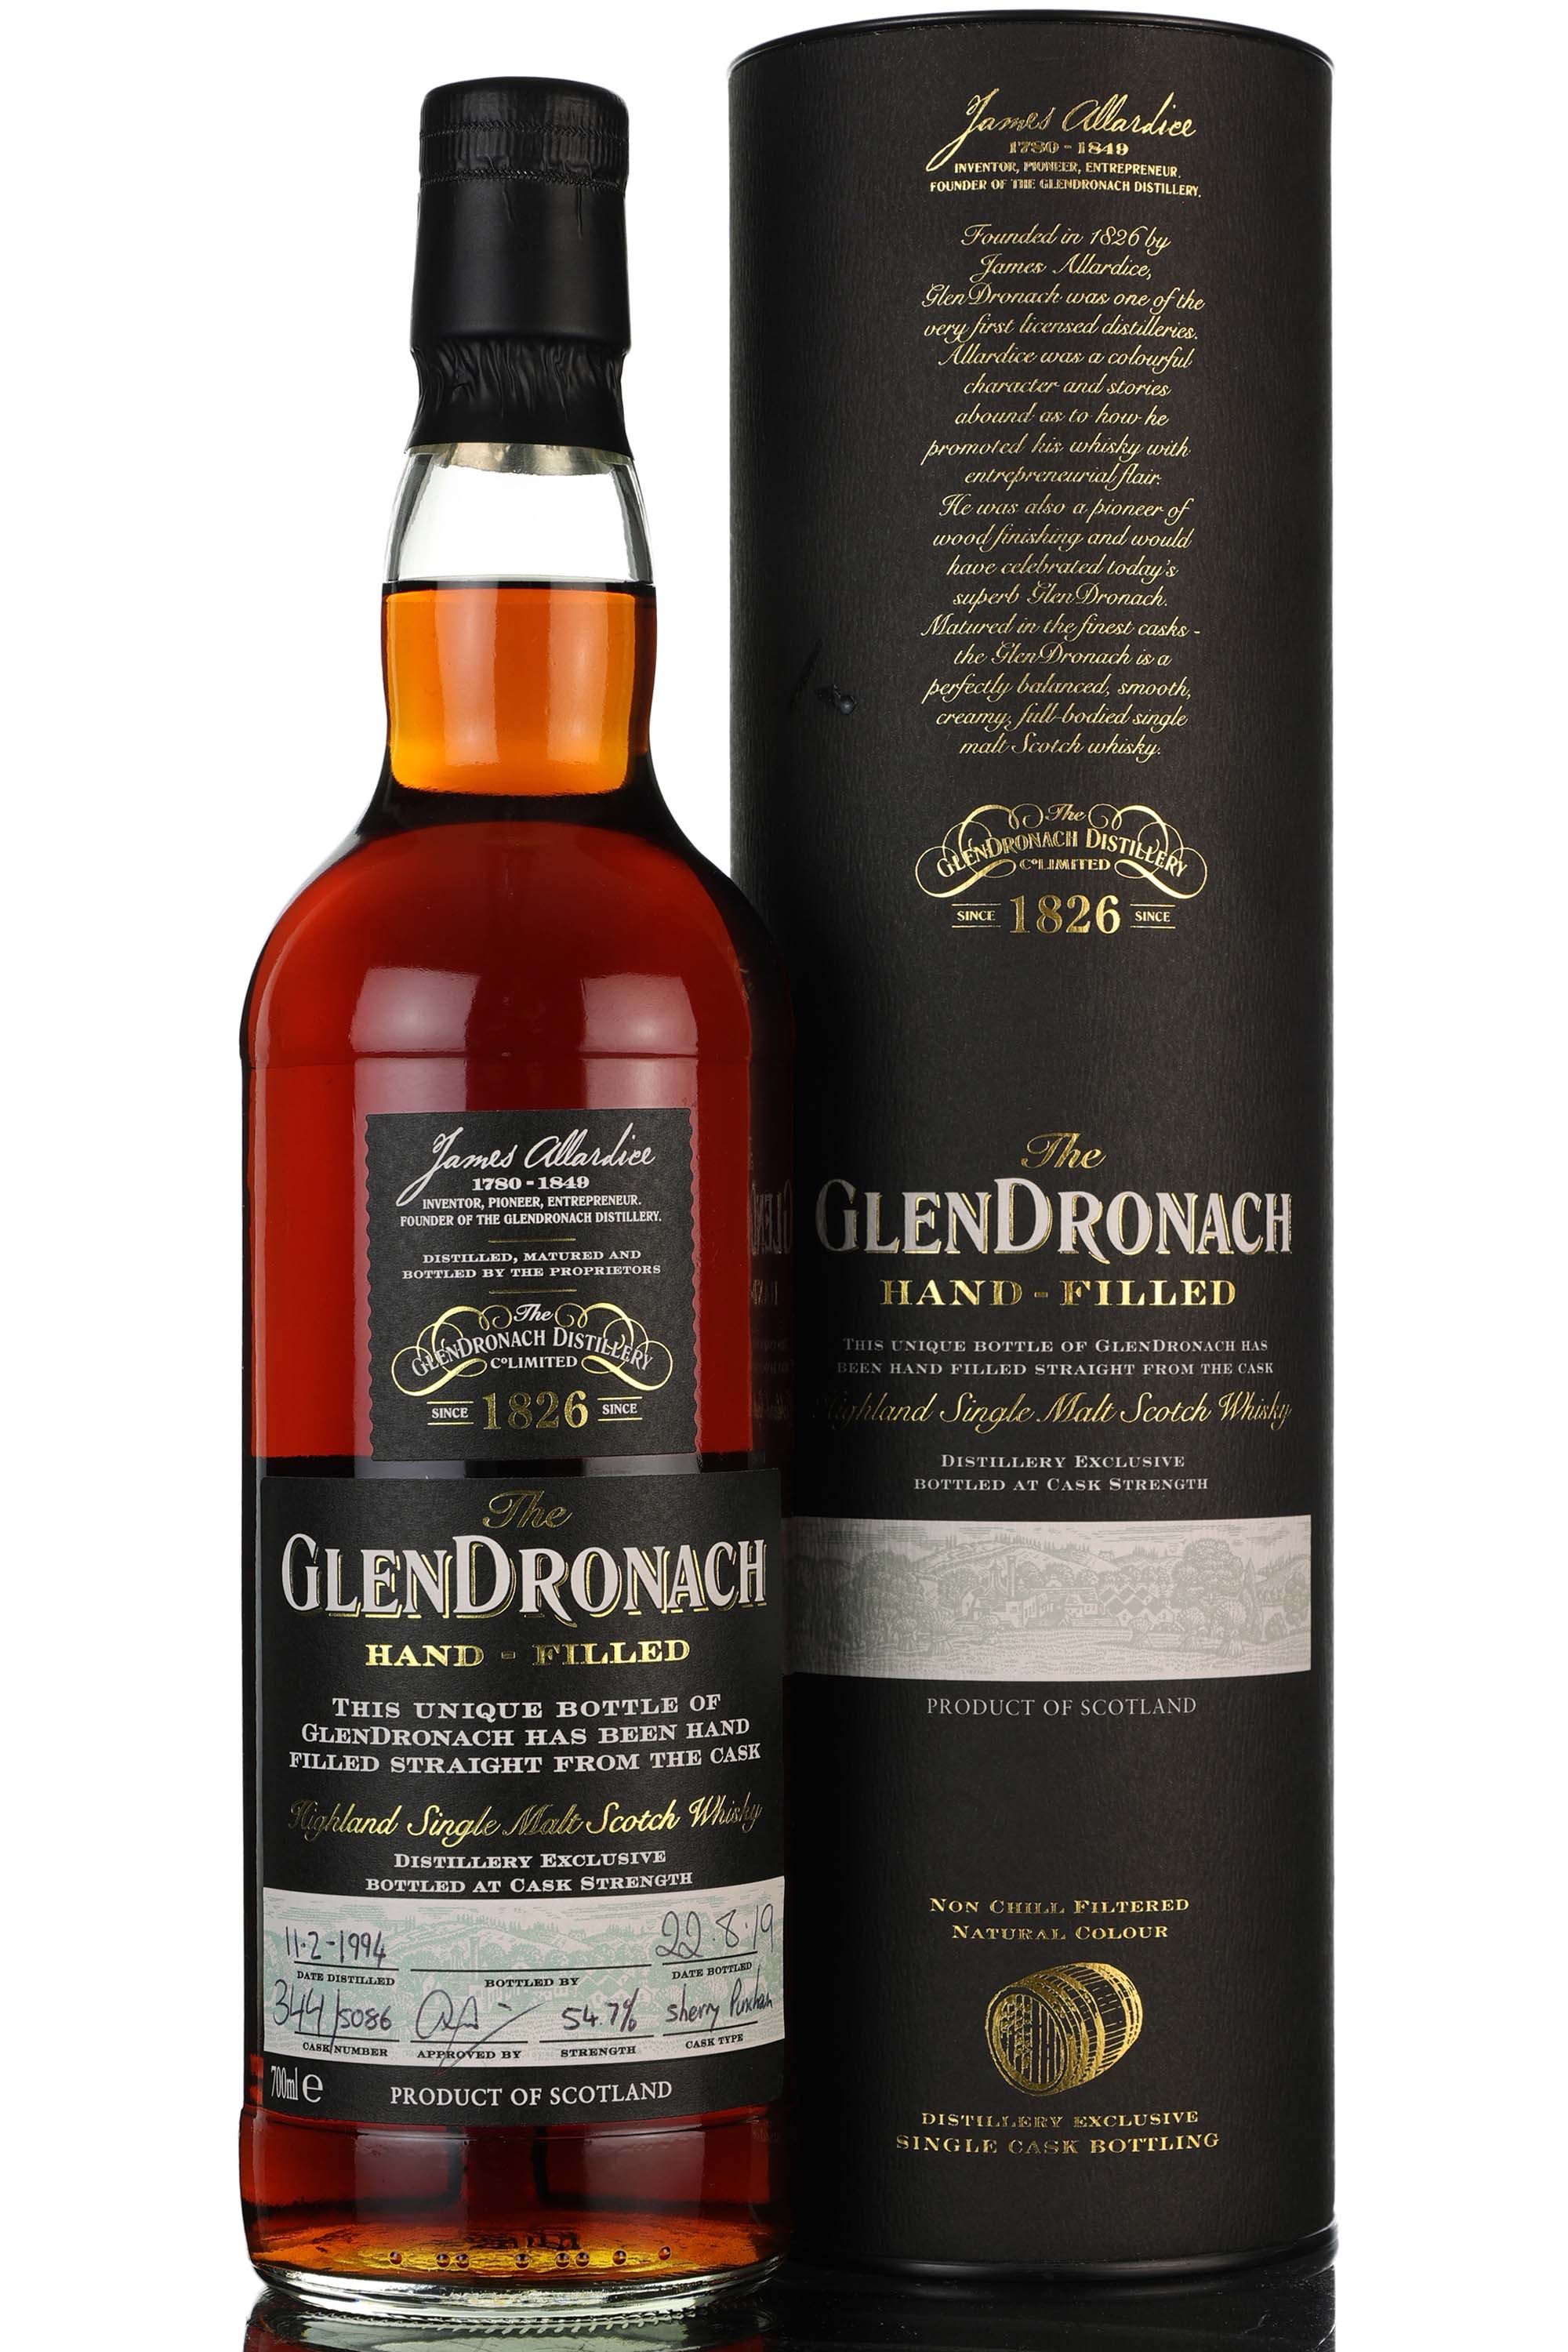 Glendronach 1994-2019 - 25 Year Old - Single Cask 5086 - Hand Filled